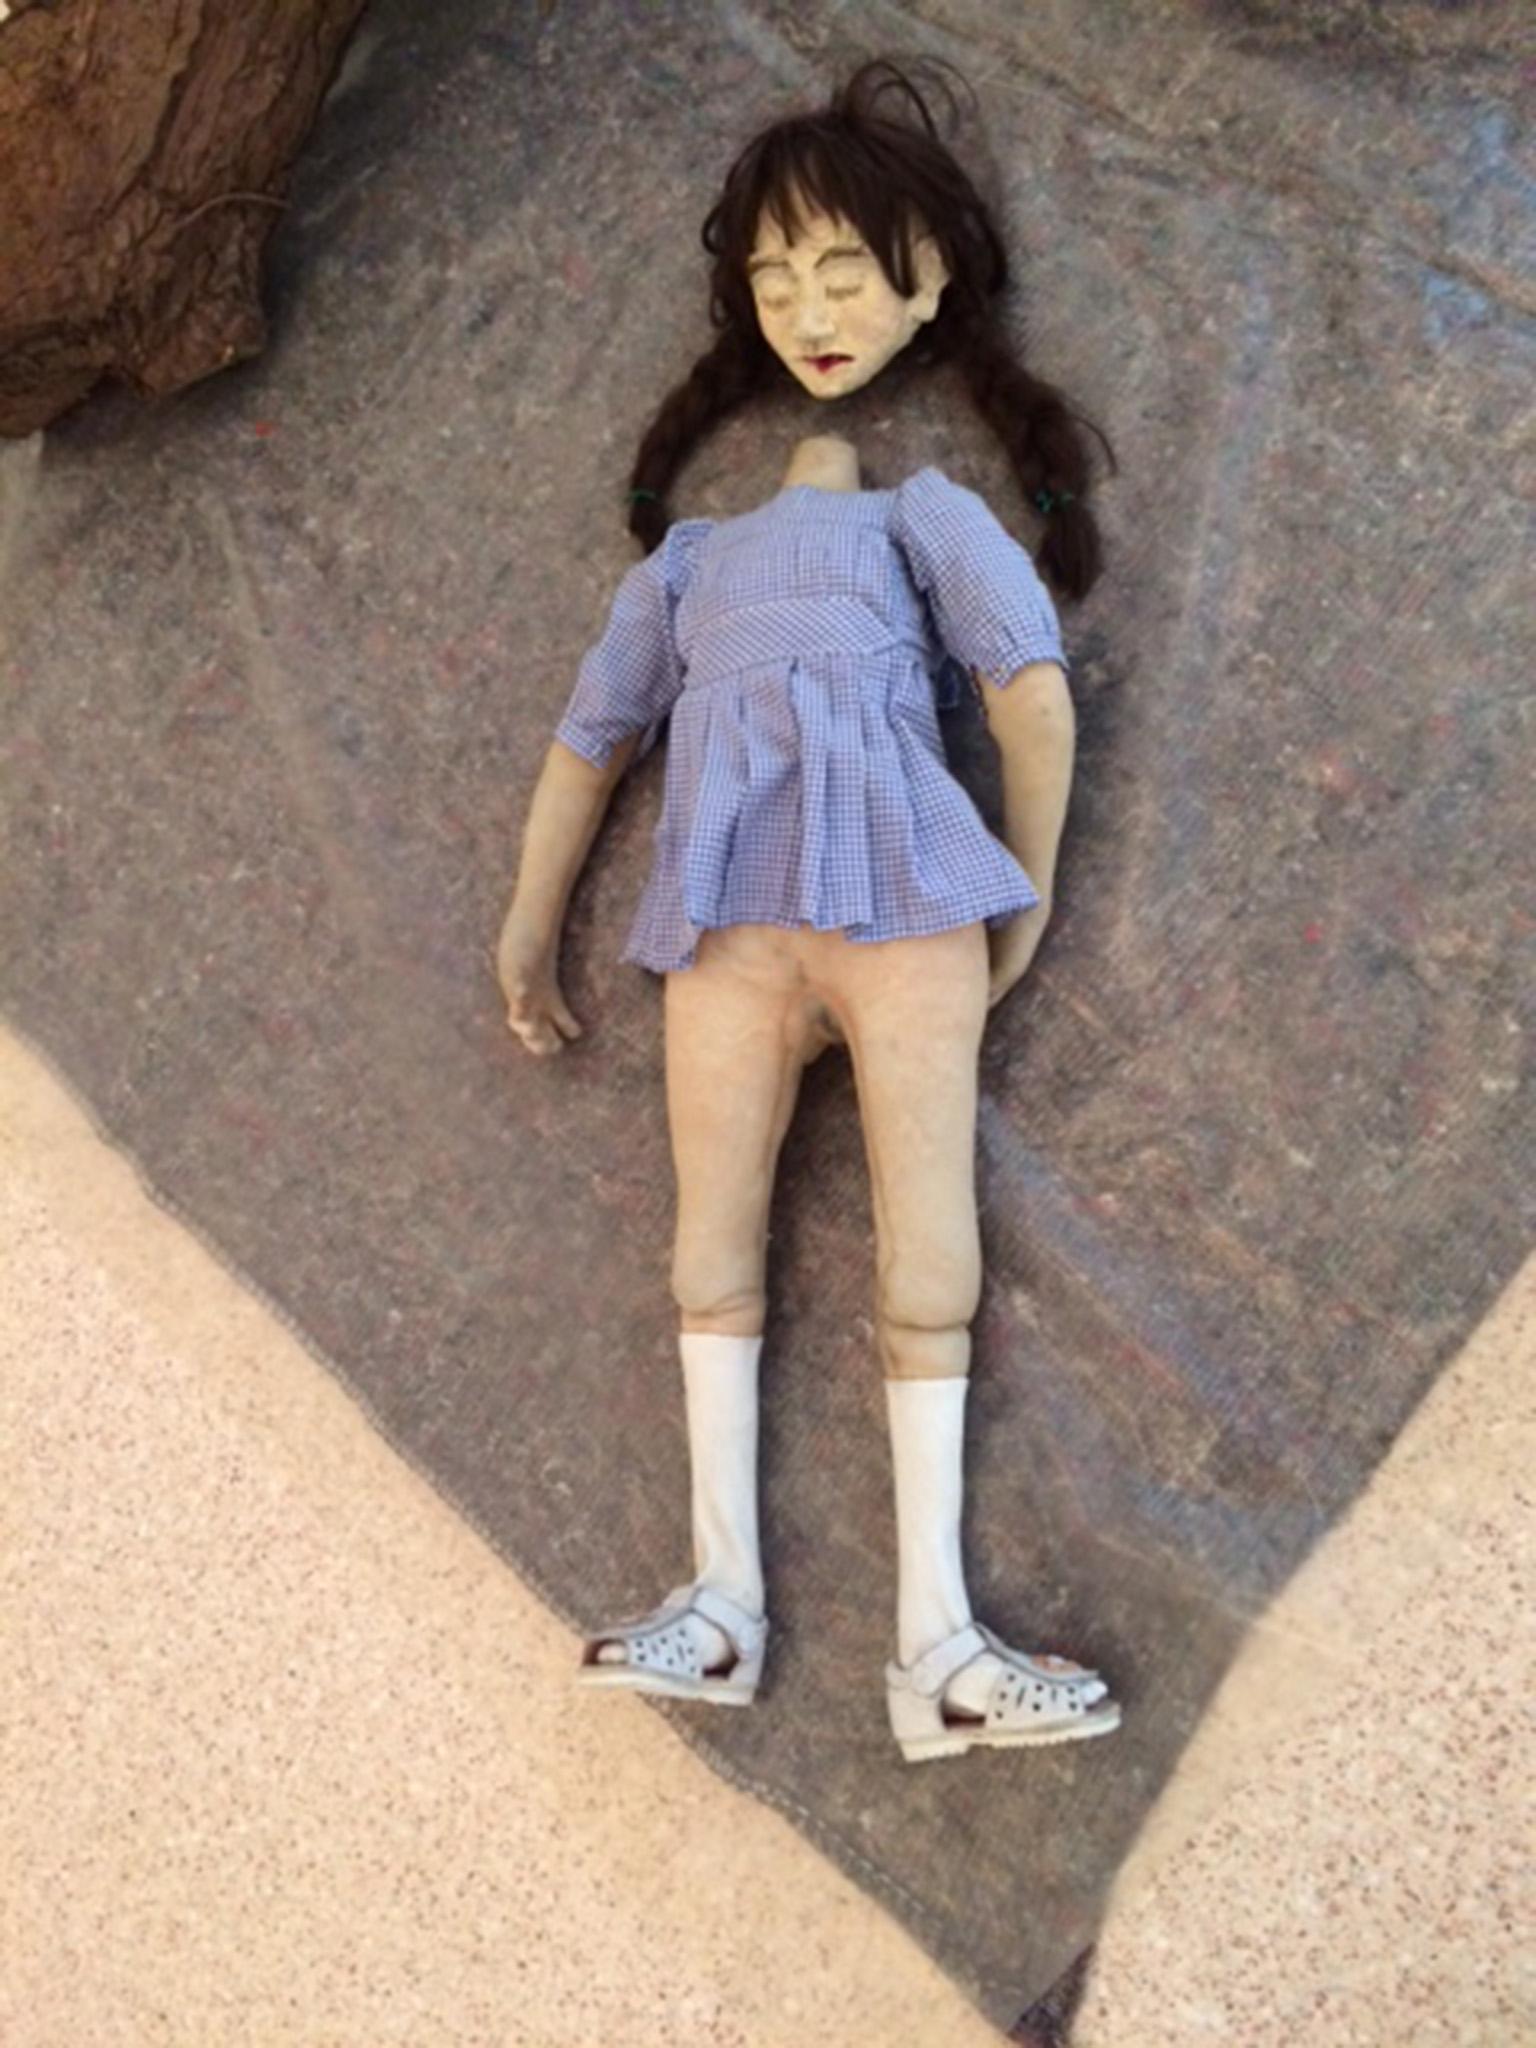 &#13;
Doll parts: one of Rego's 'dollies' with which she peoples her fantastical narratives &#13;